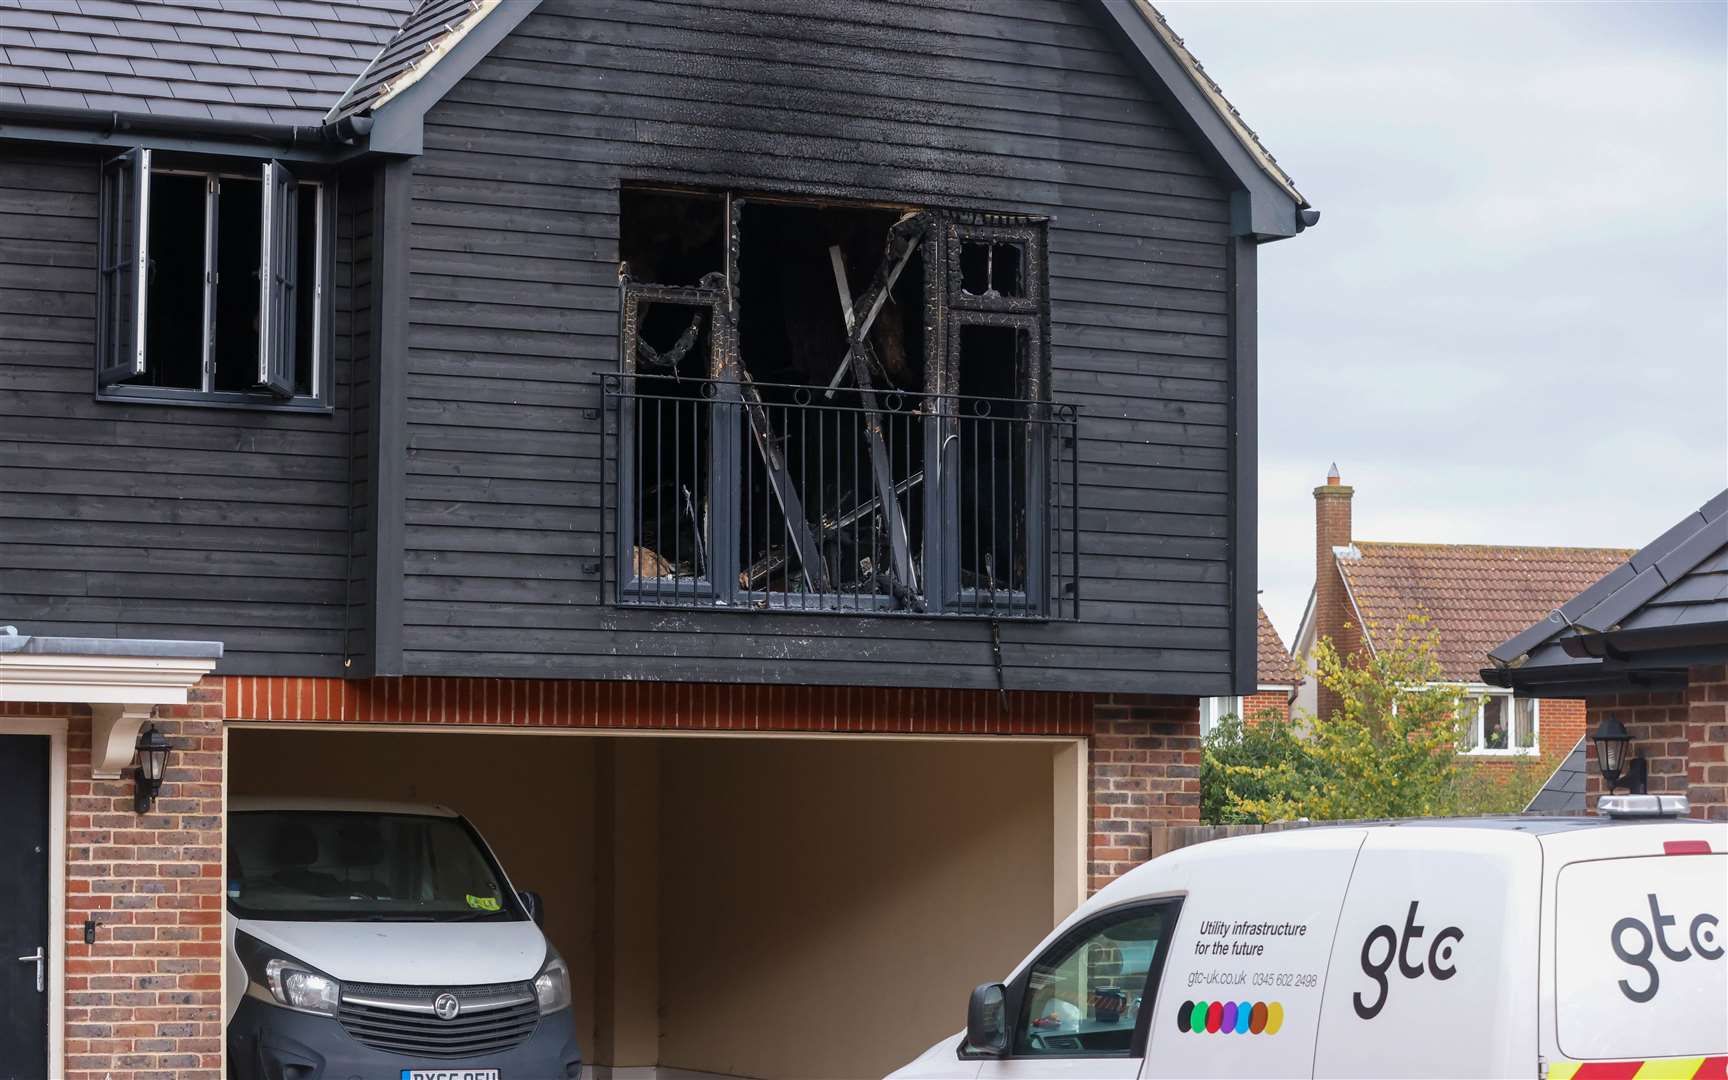 The fire is believed to have started when a tumble dryer caught alight. Picture: UKNIP